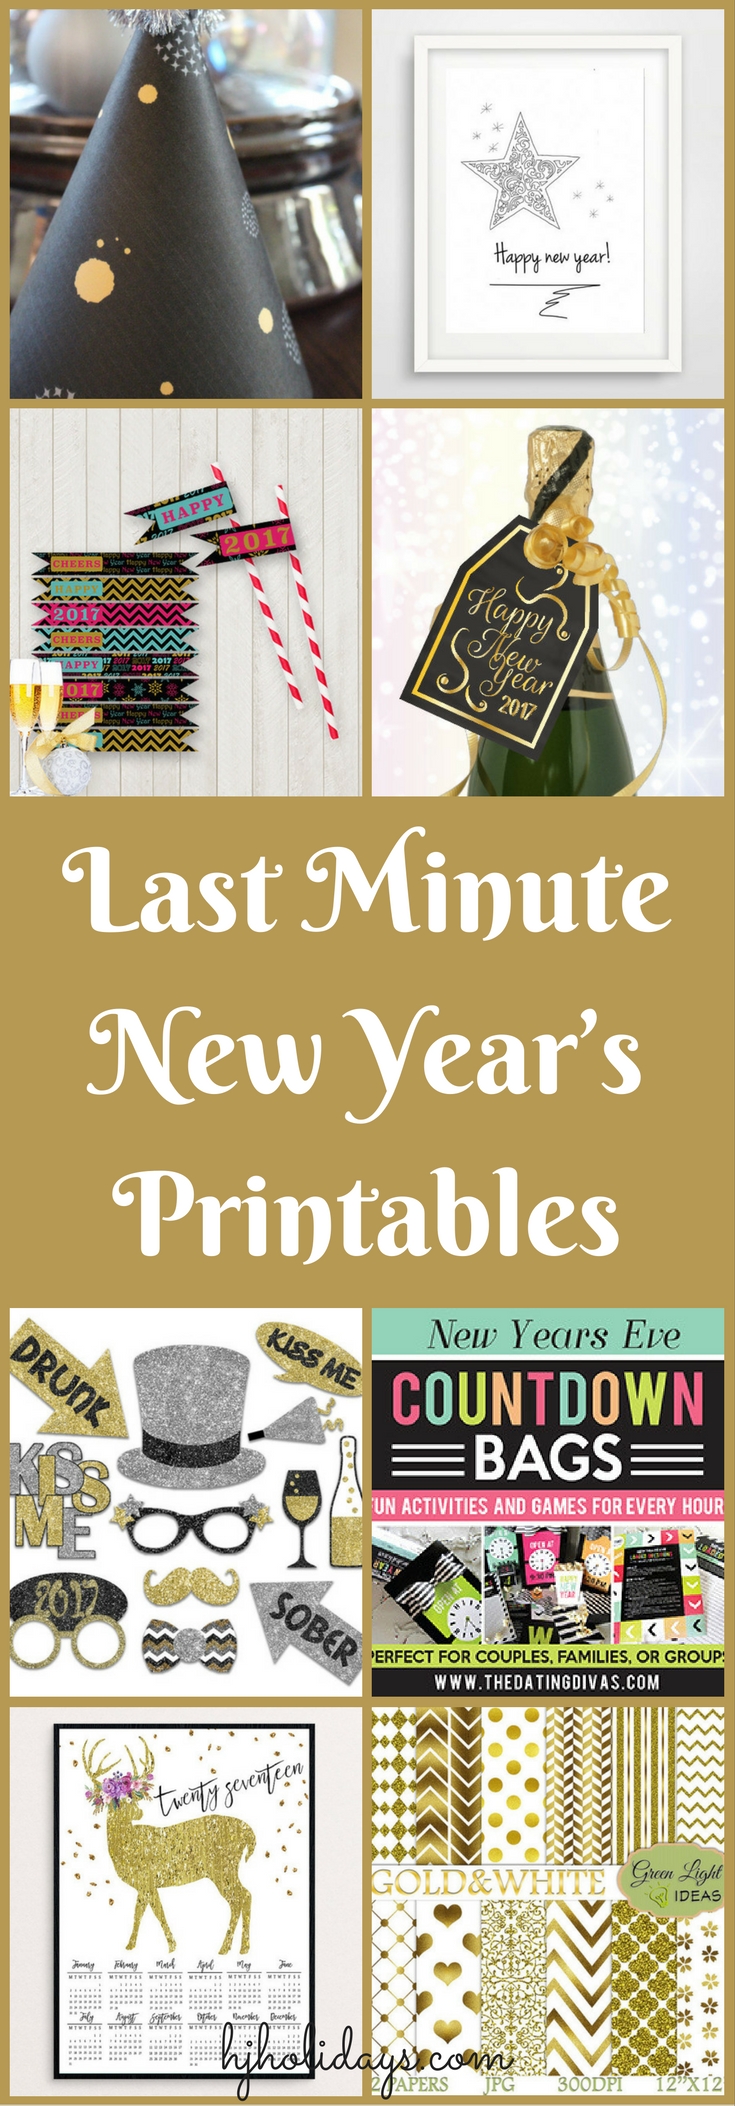 Last Minute New Year’s Printables